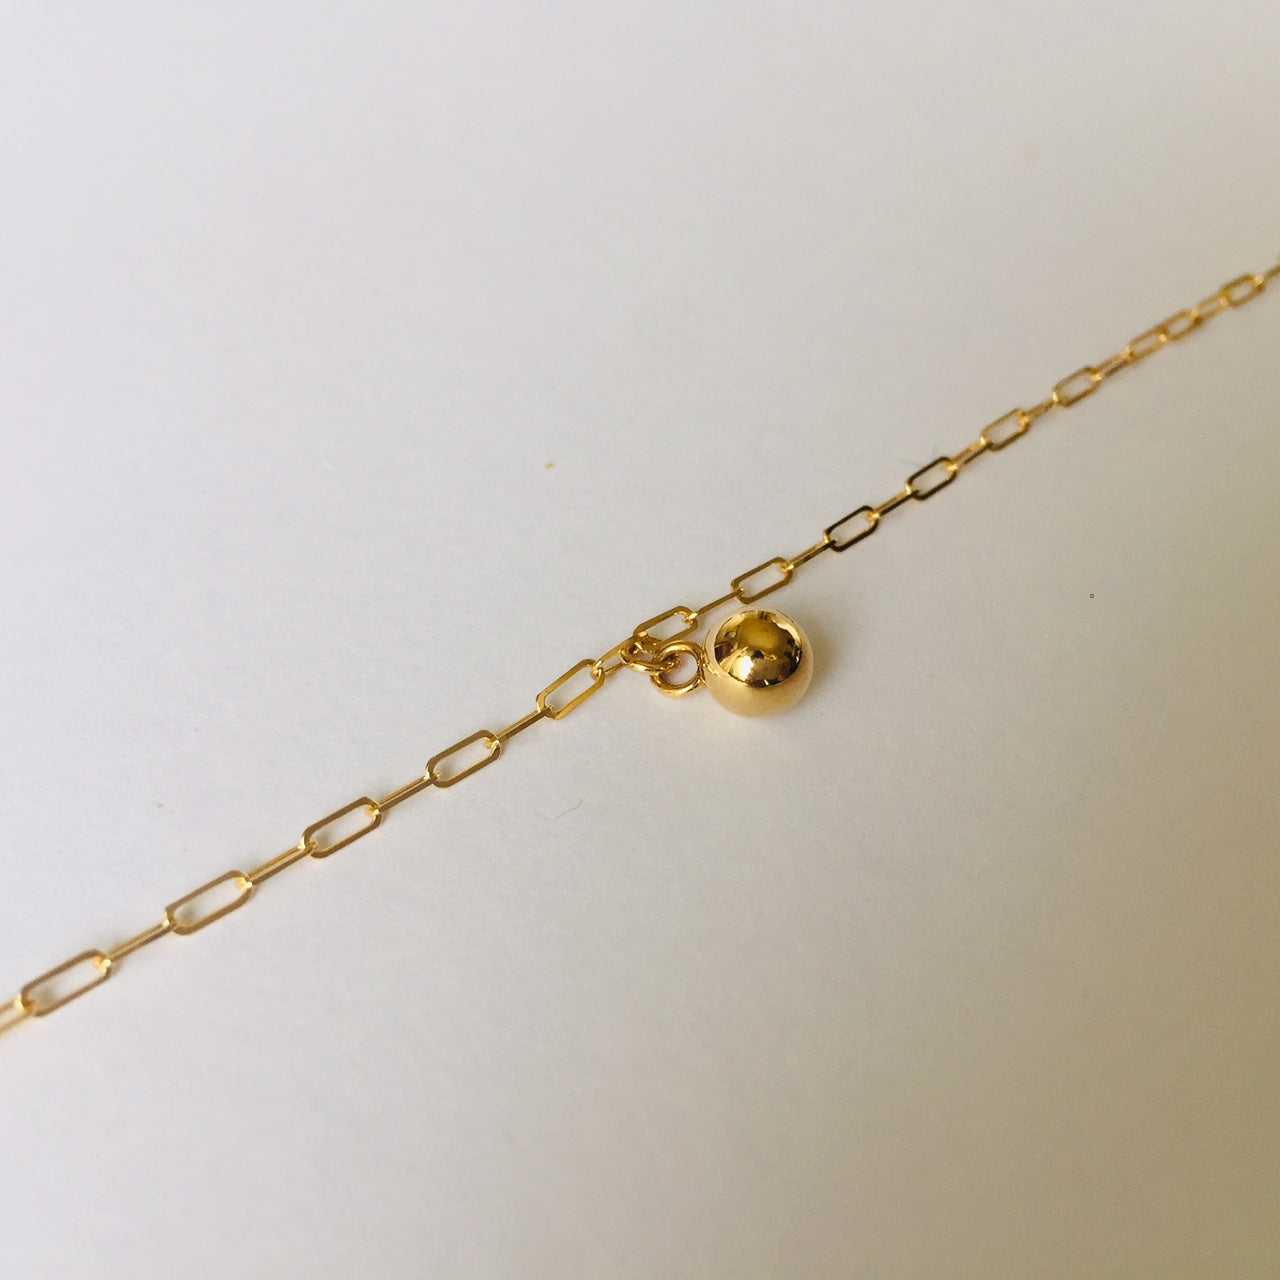 18K Gold Box Chain Bracelet with Gold Ball / Sphere Charm For Women ゴールドボール・チャーム・ブレスレット